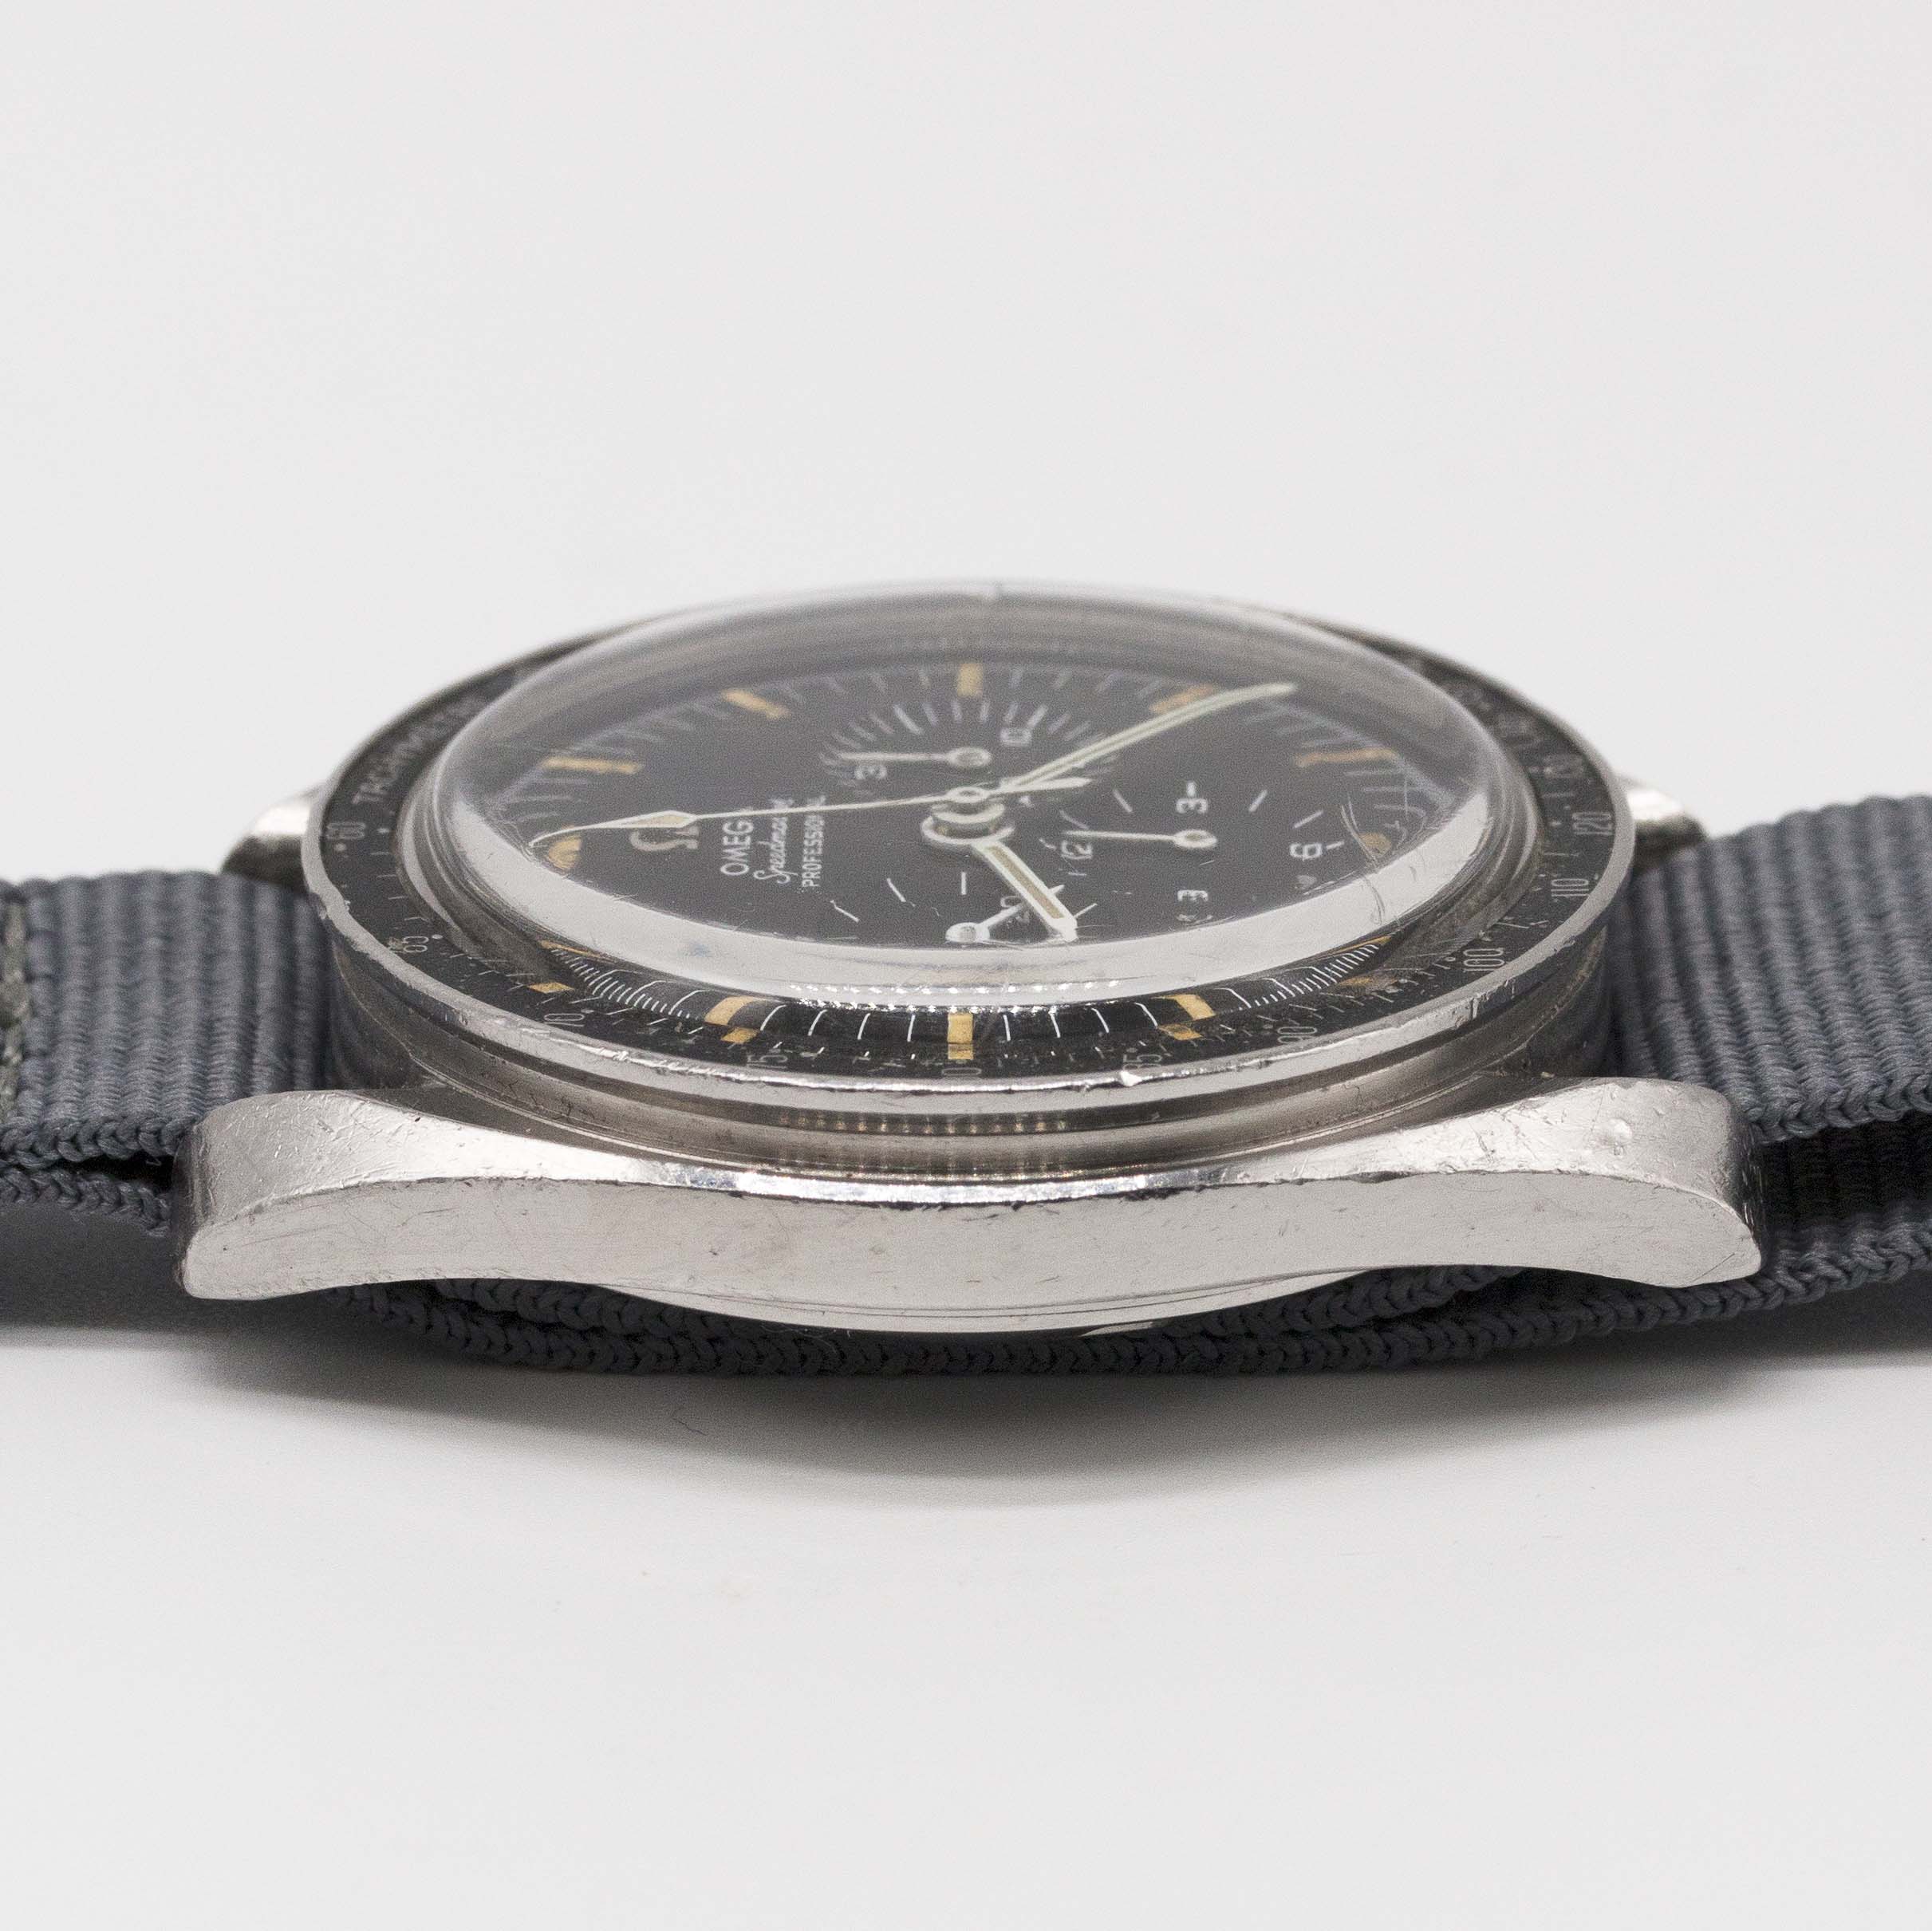 A RARE GENTLEMAN'S STAINLESS STEEL OMEGA SPEEDMASTER PROFESSIONAL "PRE MOON" CHRONOGRAPH WRIST WATCH - Image 11 of 11